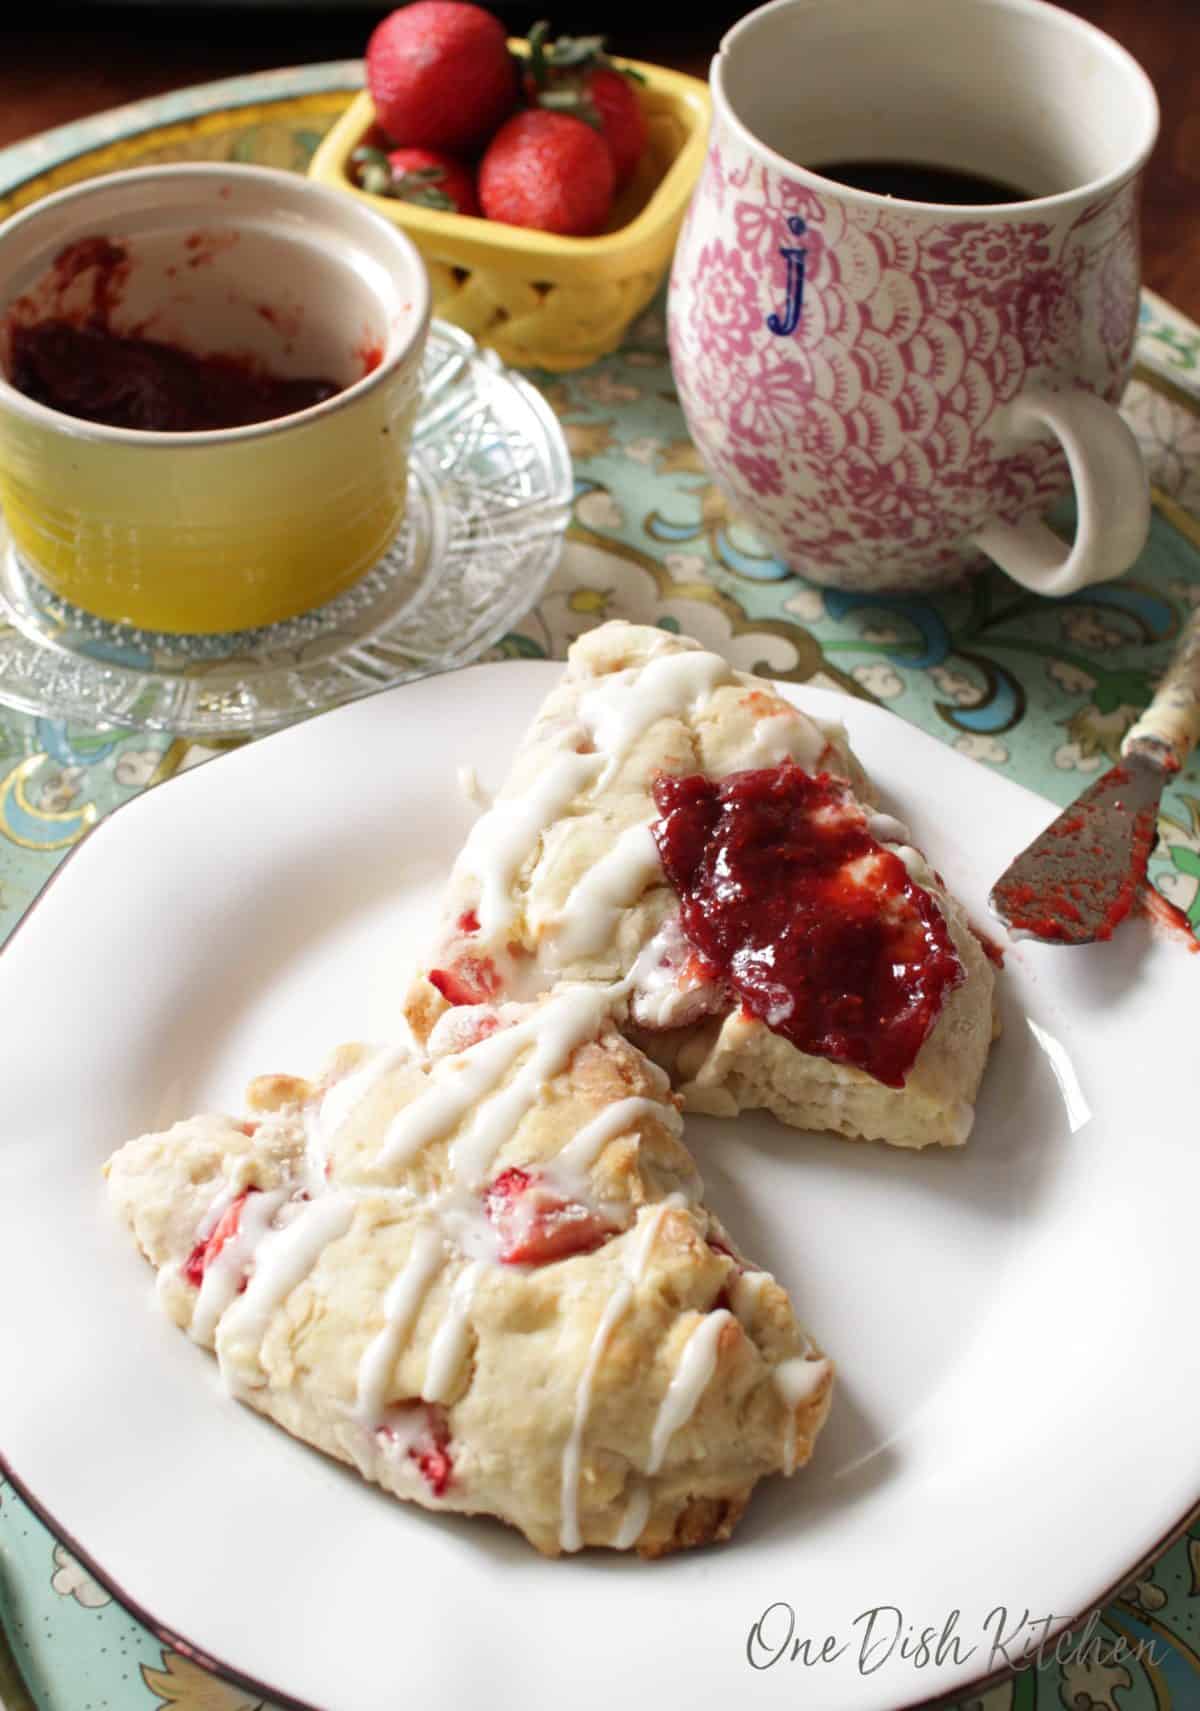 Strawberry jam spread on a scone that is on a plate next to a jar of jam, a cup of coffee, and a small bowl of strawberries all on a metal tray.